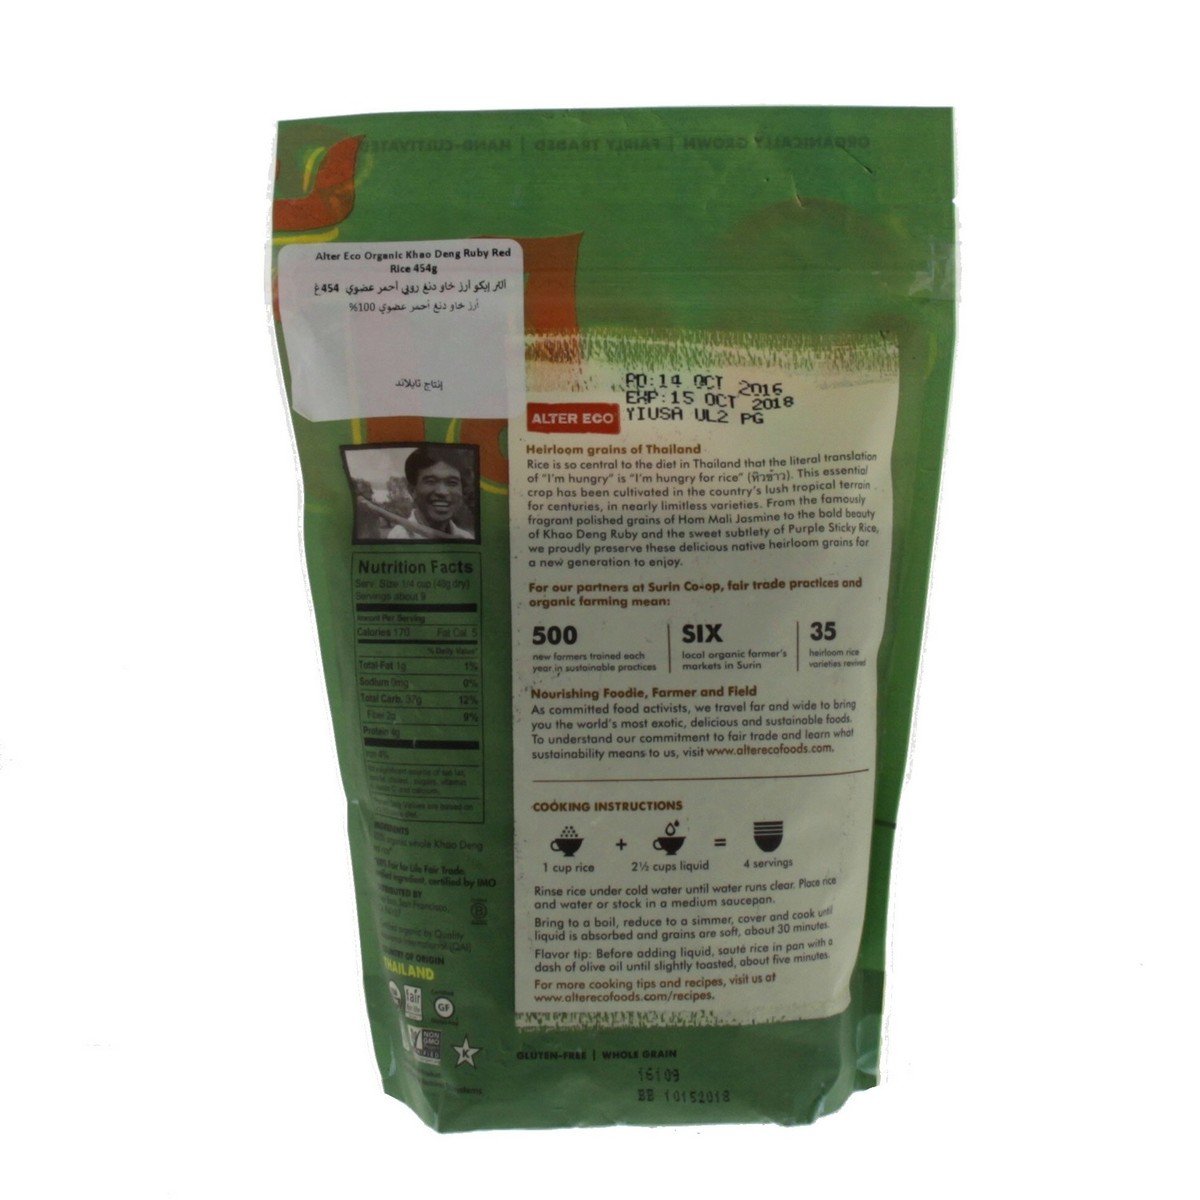 Alter Eco Organic Ruby Red Rice 454 g